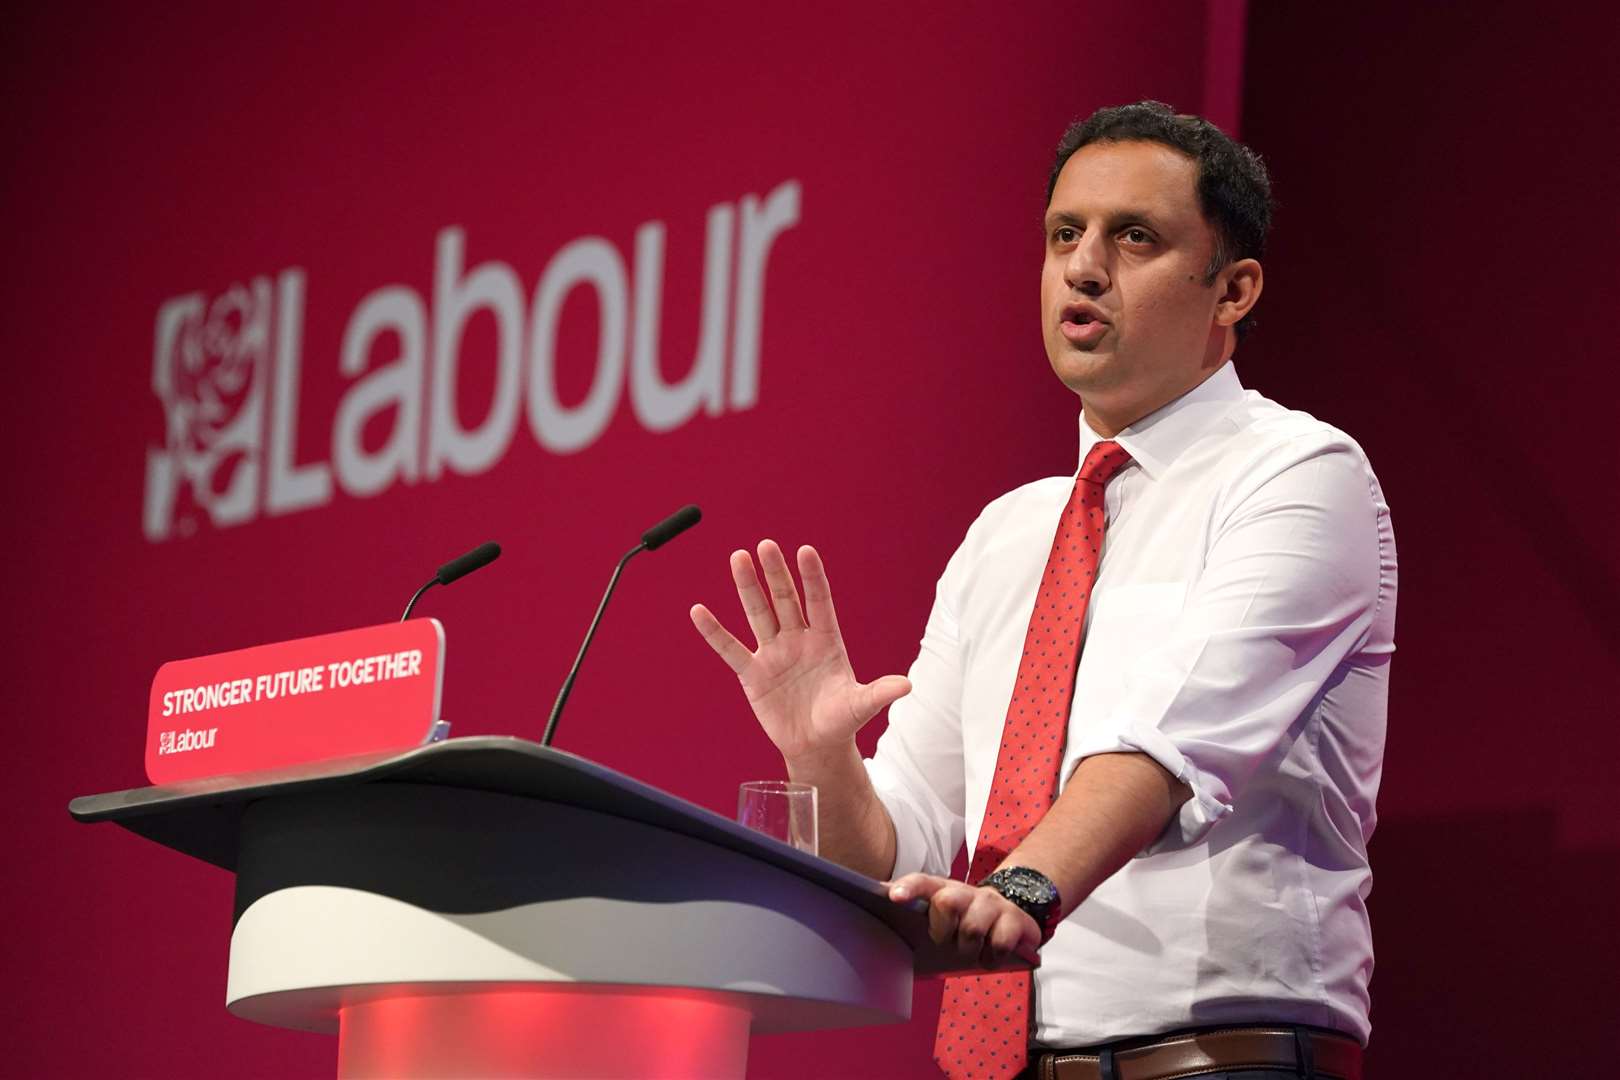 Scottish Labour leader Anas Sarwar speaks at the Labour Party conference in Brighton (Gareth Fuller/PA)